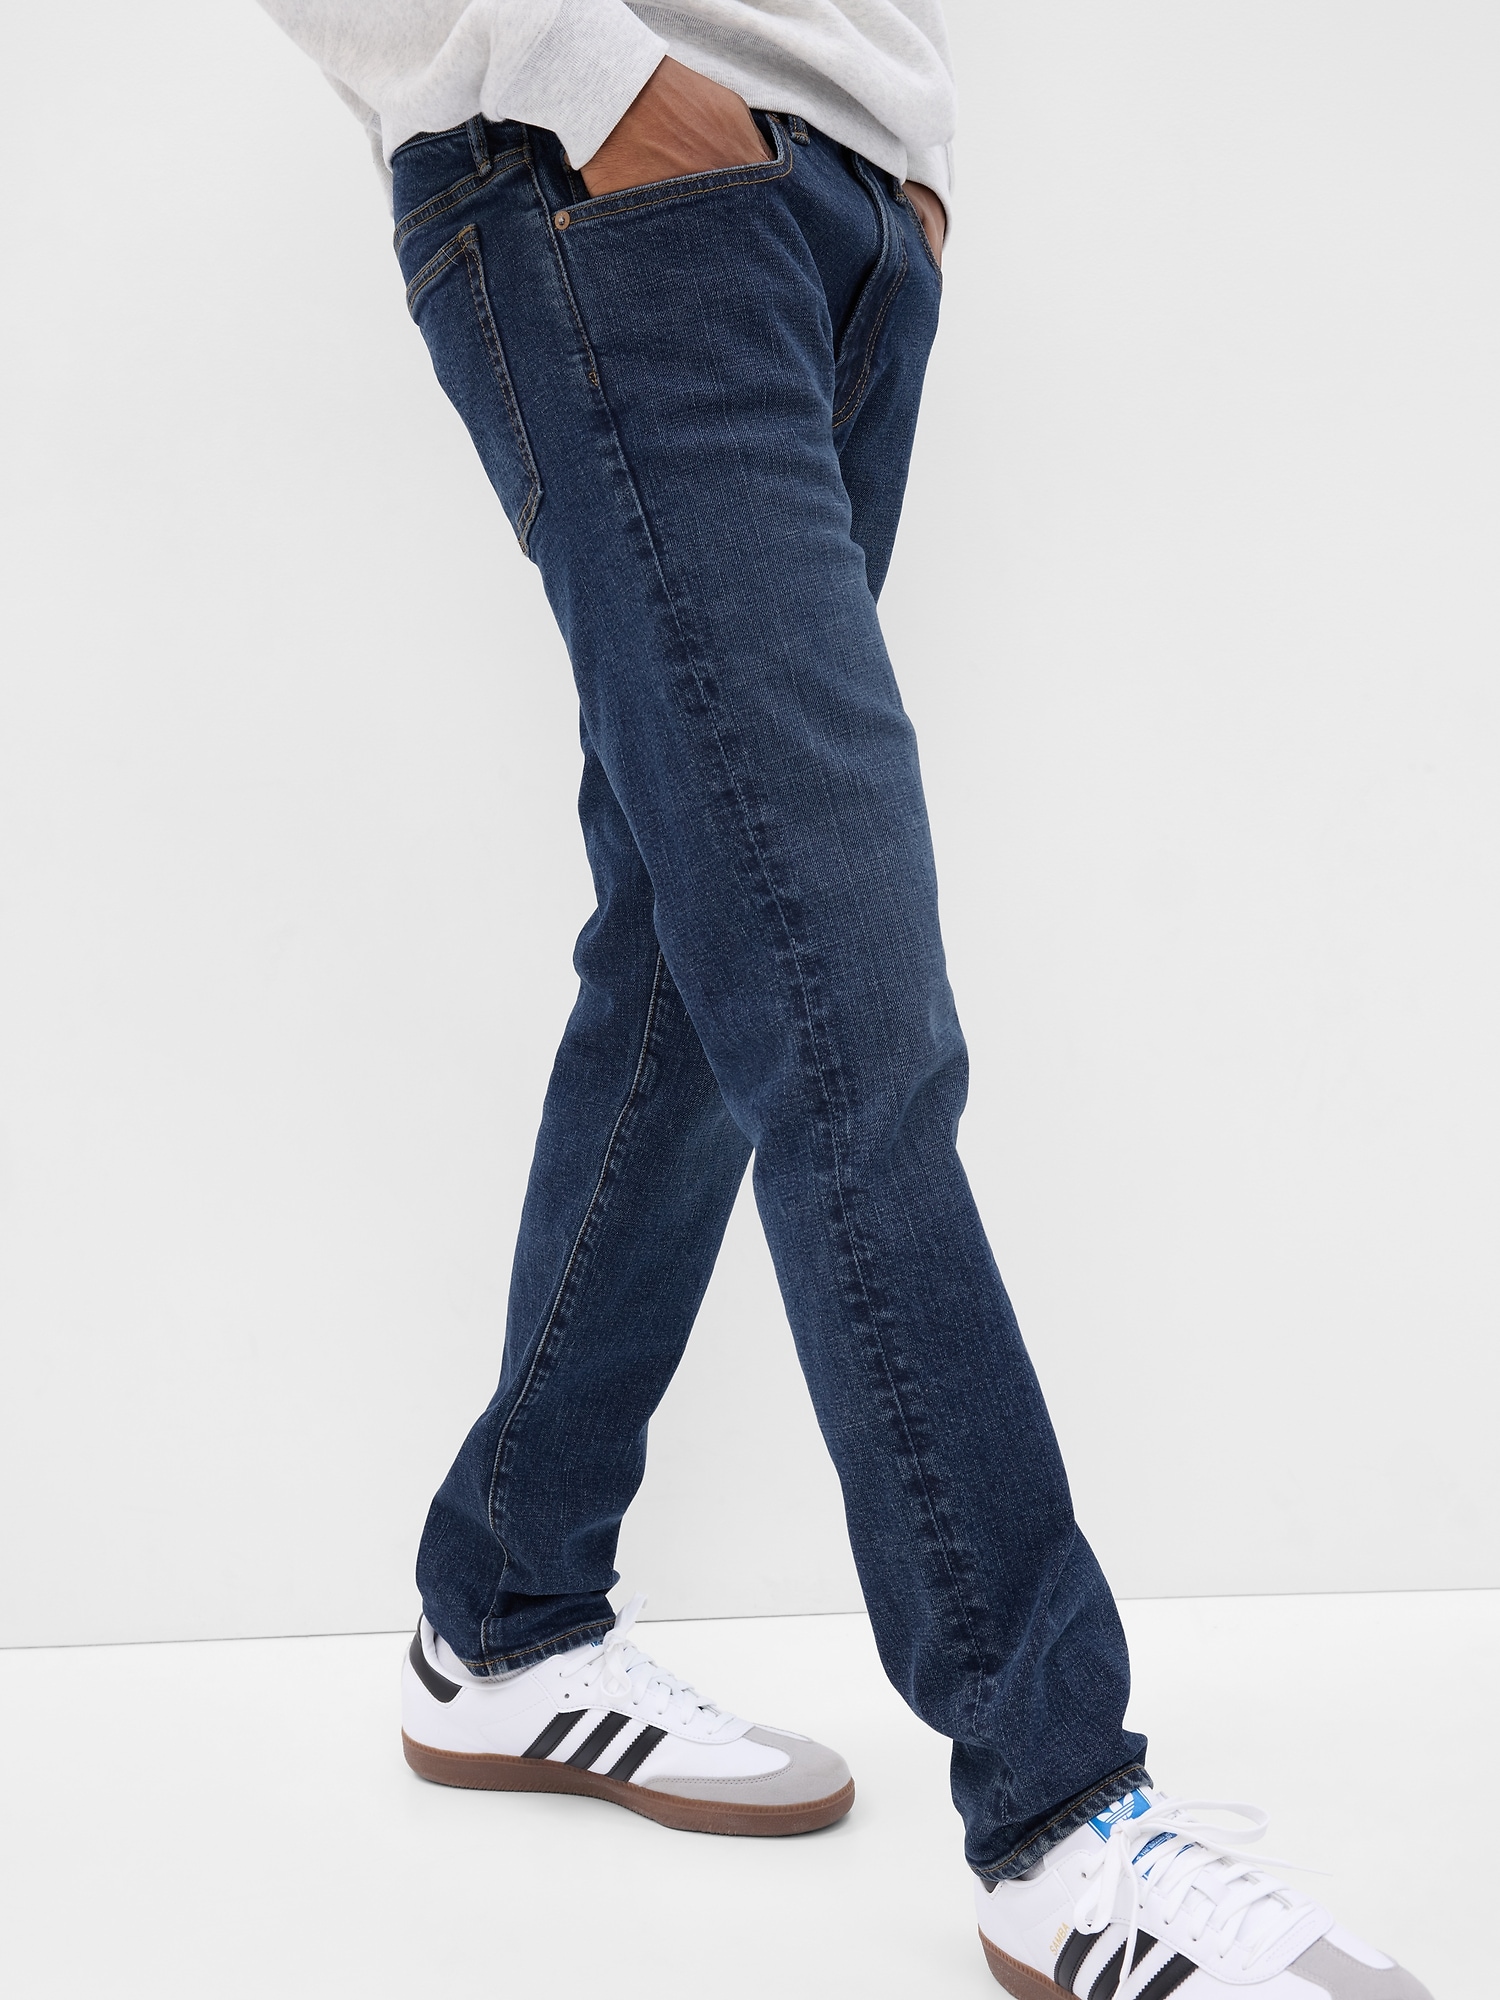 Slim Jeans in GapFlex with Washwell |